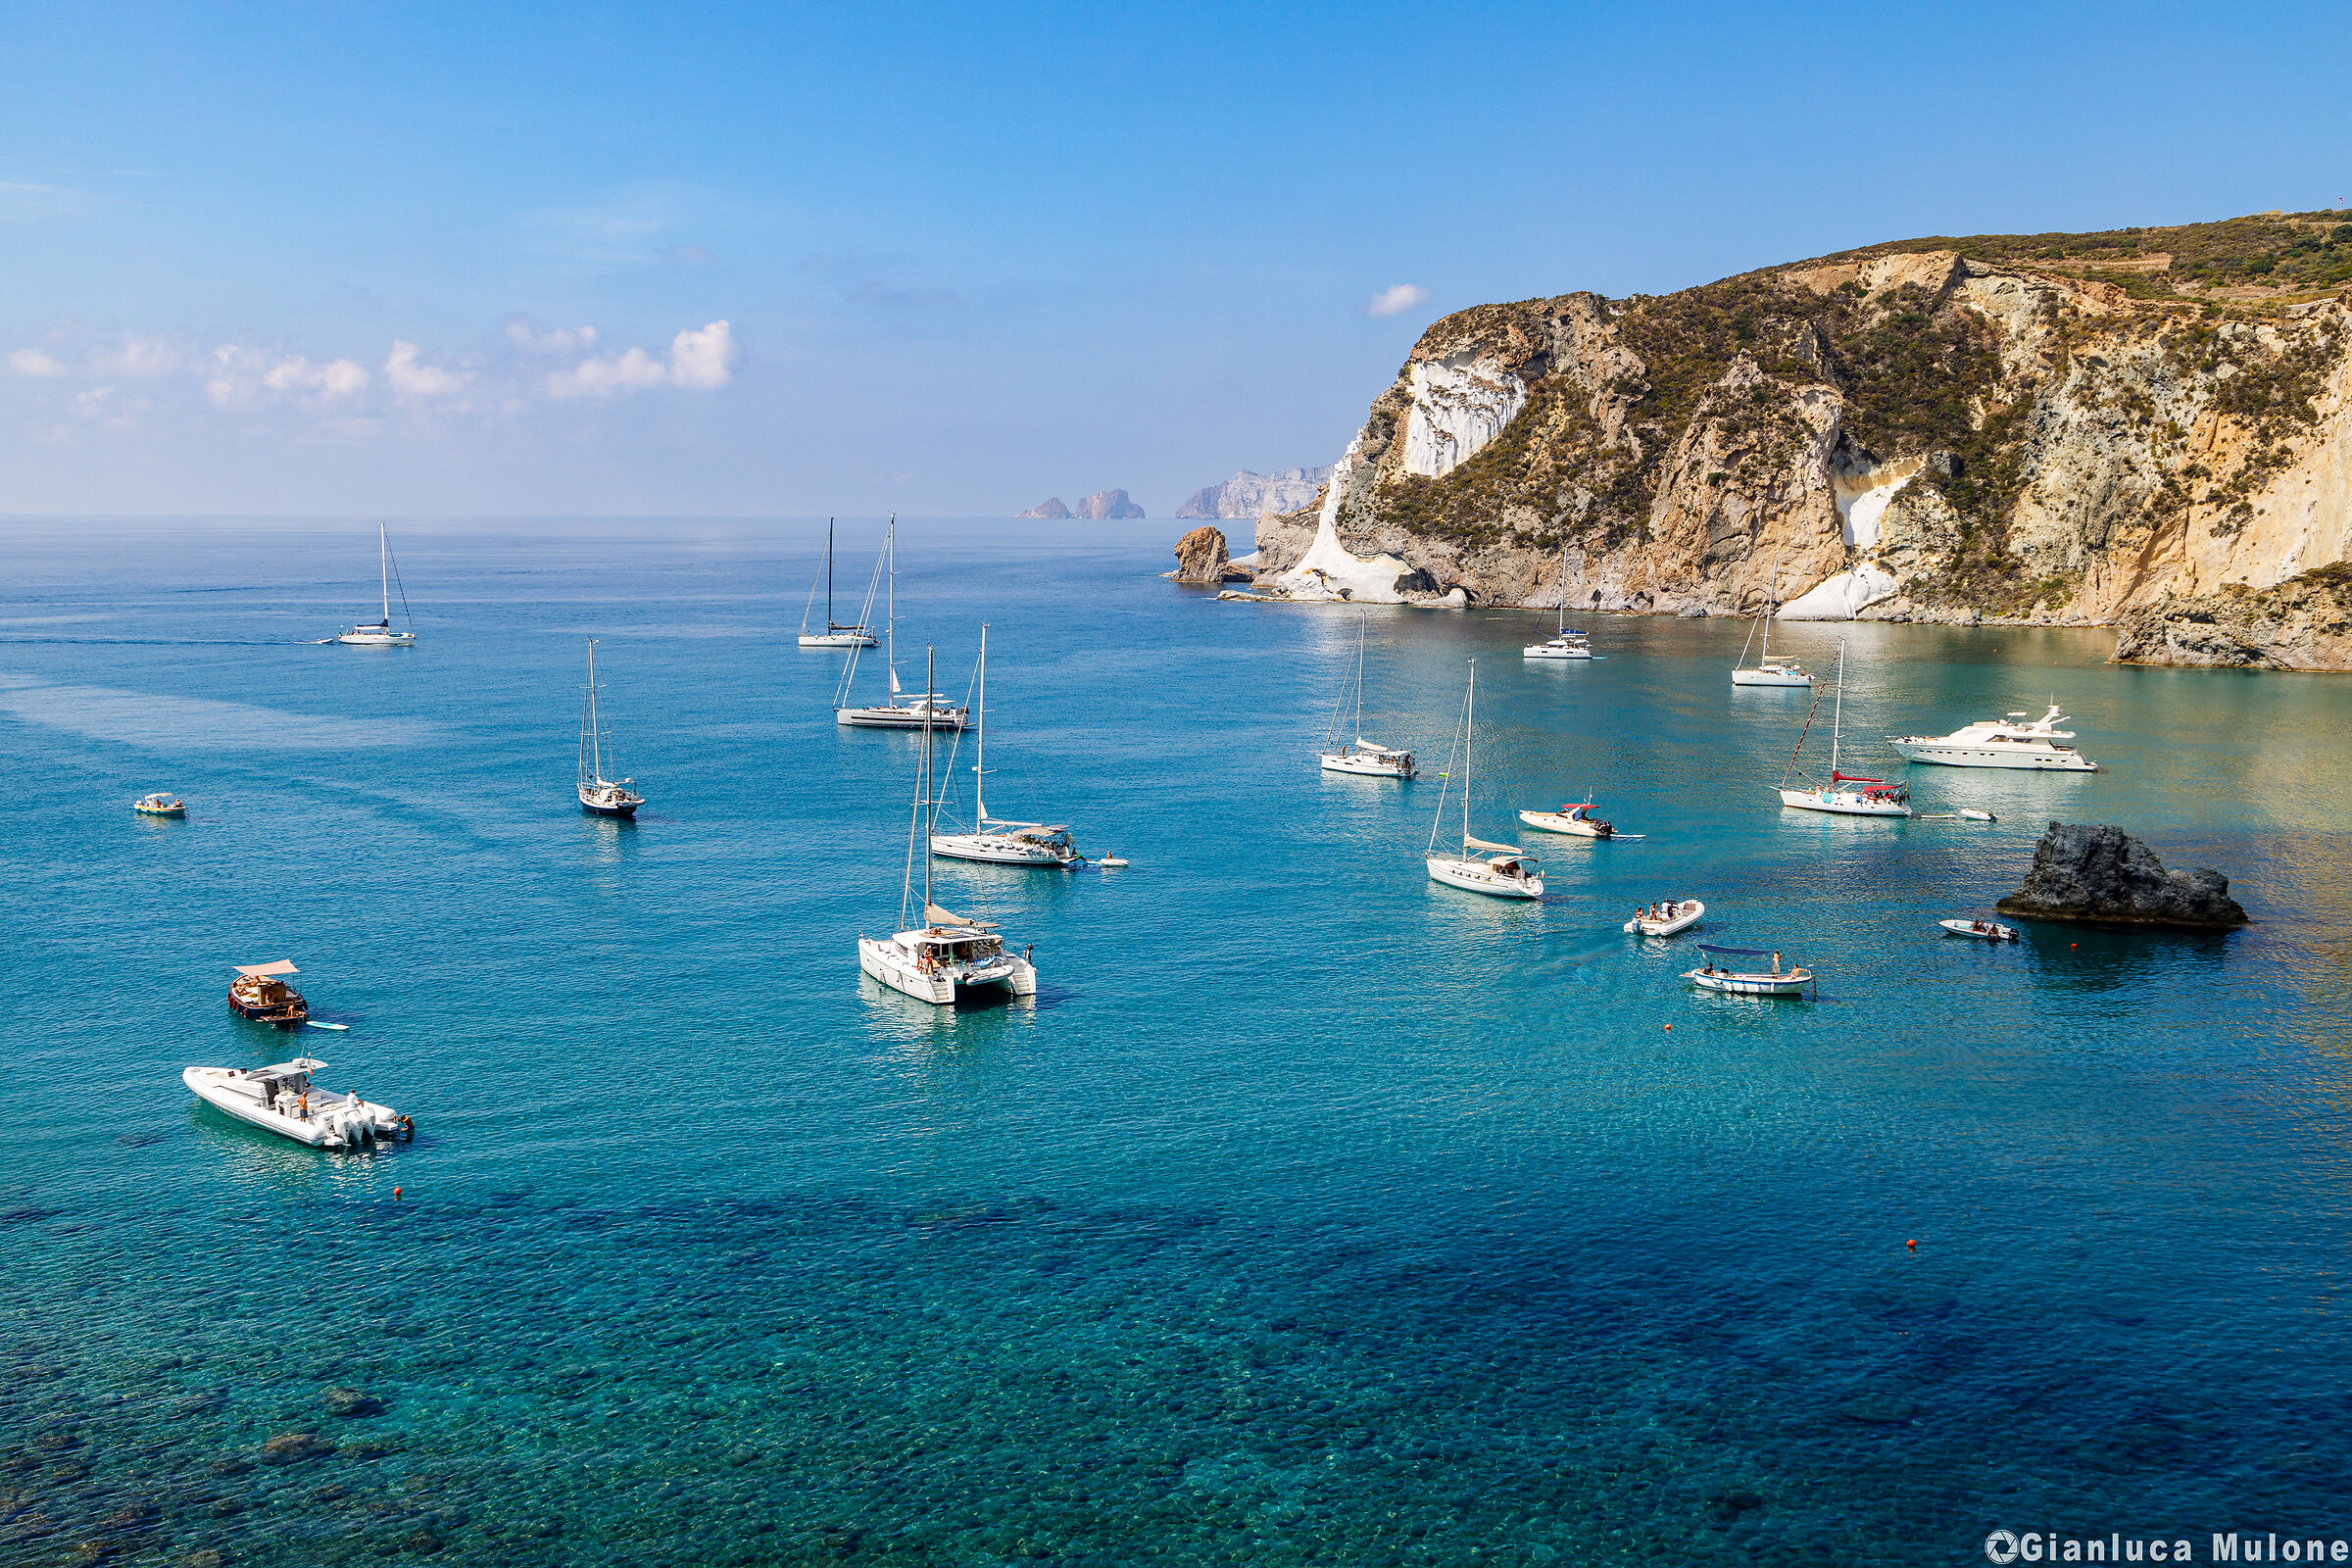 Postcard from the Island of Ponza...